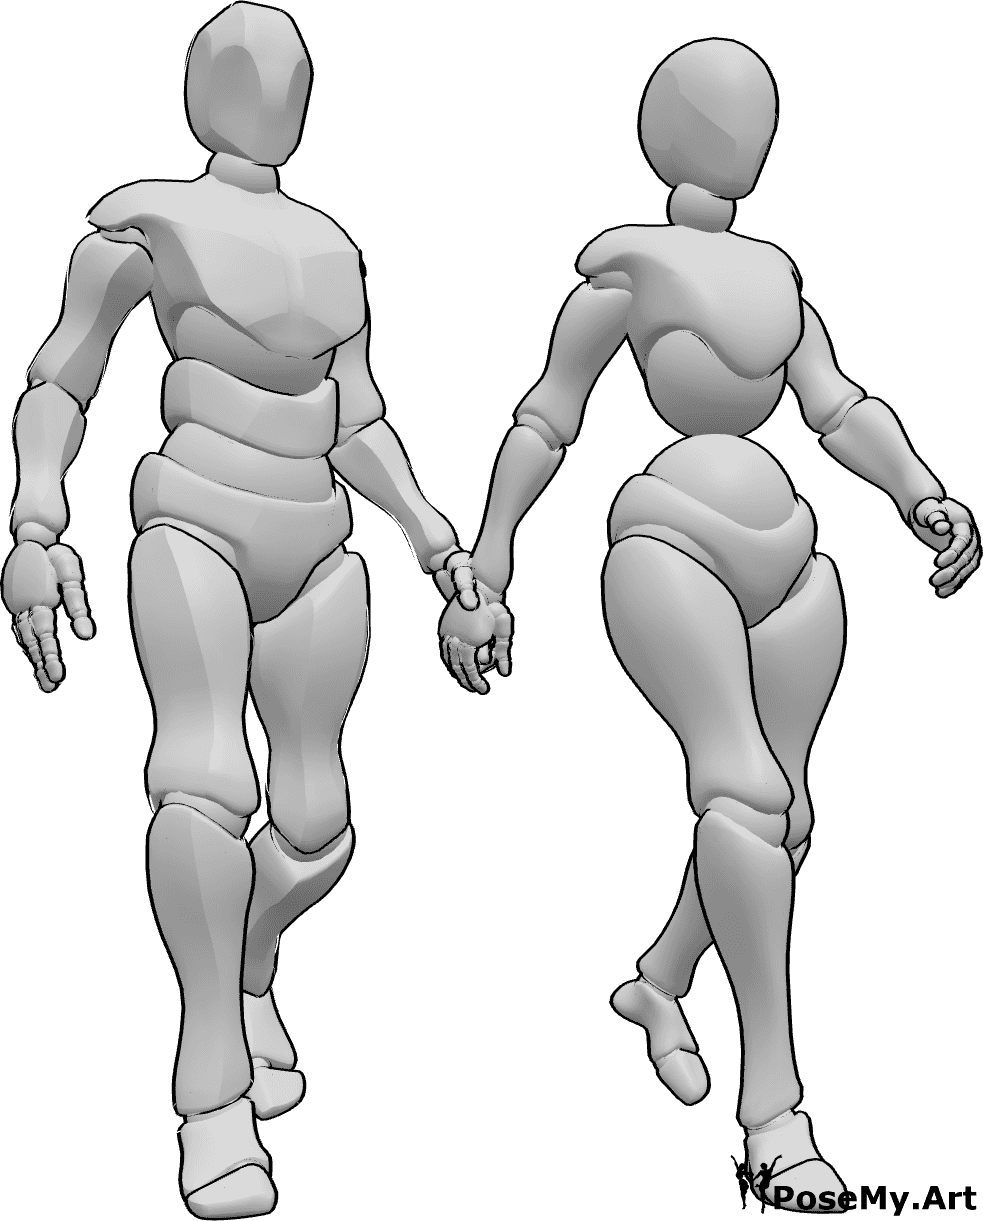 Pose Reference - Stressed couple walking pose - Angry couple is walking together, holding each others hands, walking in a hurry